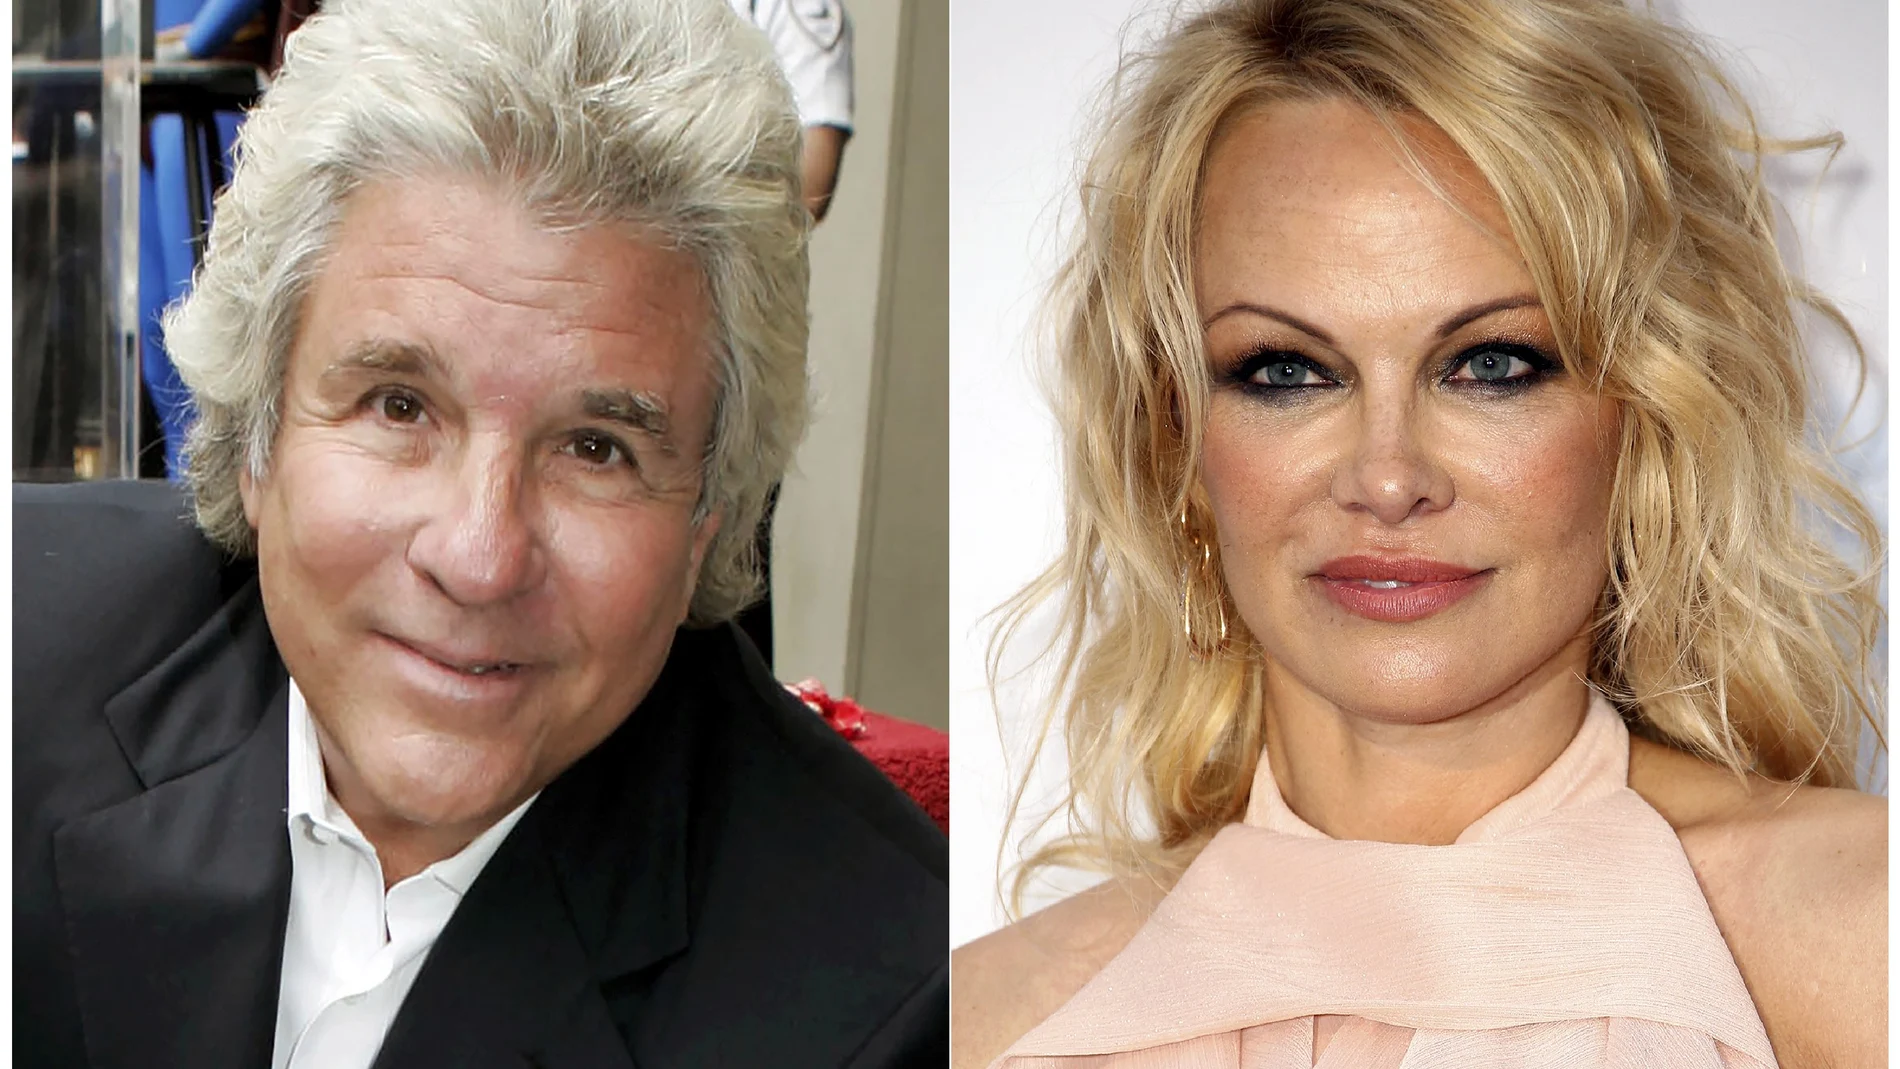 This combination photo shows Hollywood producer Jon Peters at a ceremony honoring him with a star on the Hollywood Walk of Fame in Los Angeles on May 1, 2007, left, and model-actress Pamela Anderson at the amfAR, Cinema Against AIDS, benefit in Cap d'Antibes, southern France, on May 23, 2019. A representative for Anderson said the couple married in a private ceremony in Malibu, California on Monday, Jan.20, 2020. It's the fifth marriage for both the 52-year-old model-actress and the 74-year-old film producer, who first dated more than 30 years ago and recently reunited. (AP Photo)